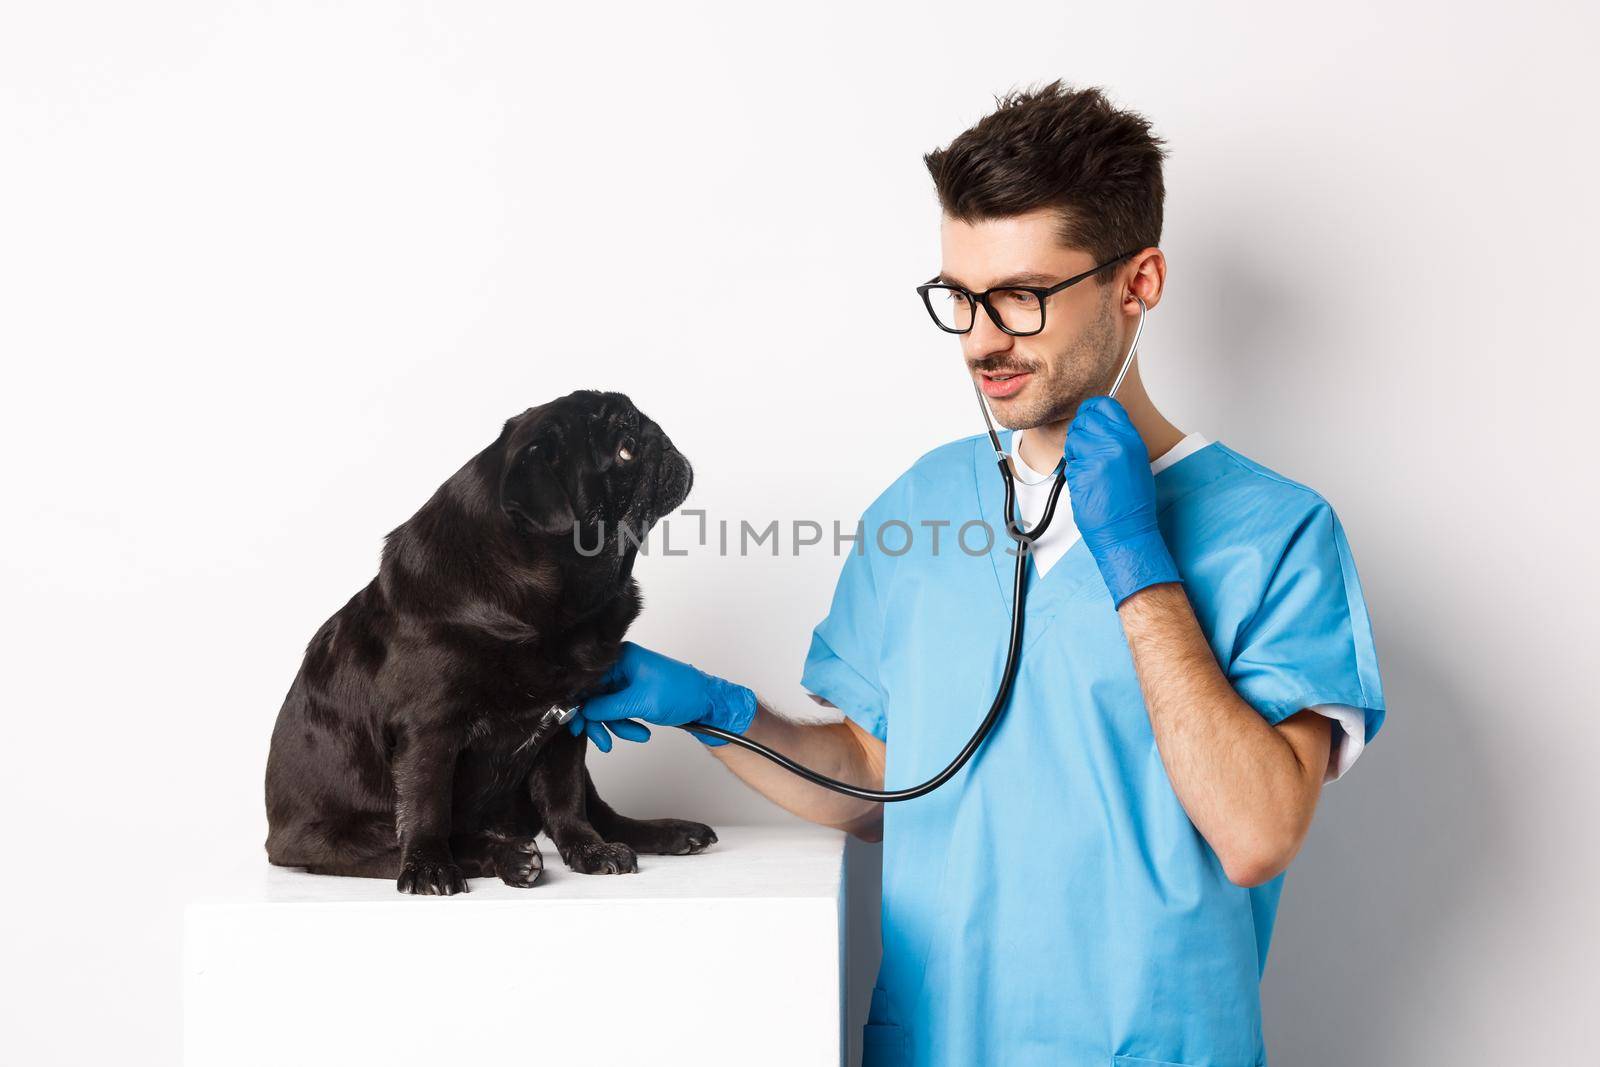 Handsome doctor veterinarian smiling, examining pet in vet clinic, checking pug dog with stethoscope, standing over white background.